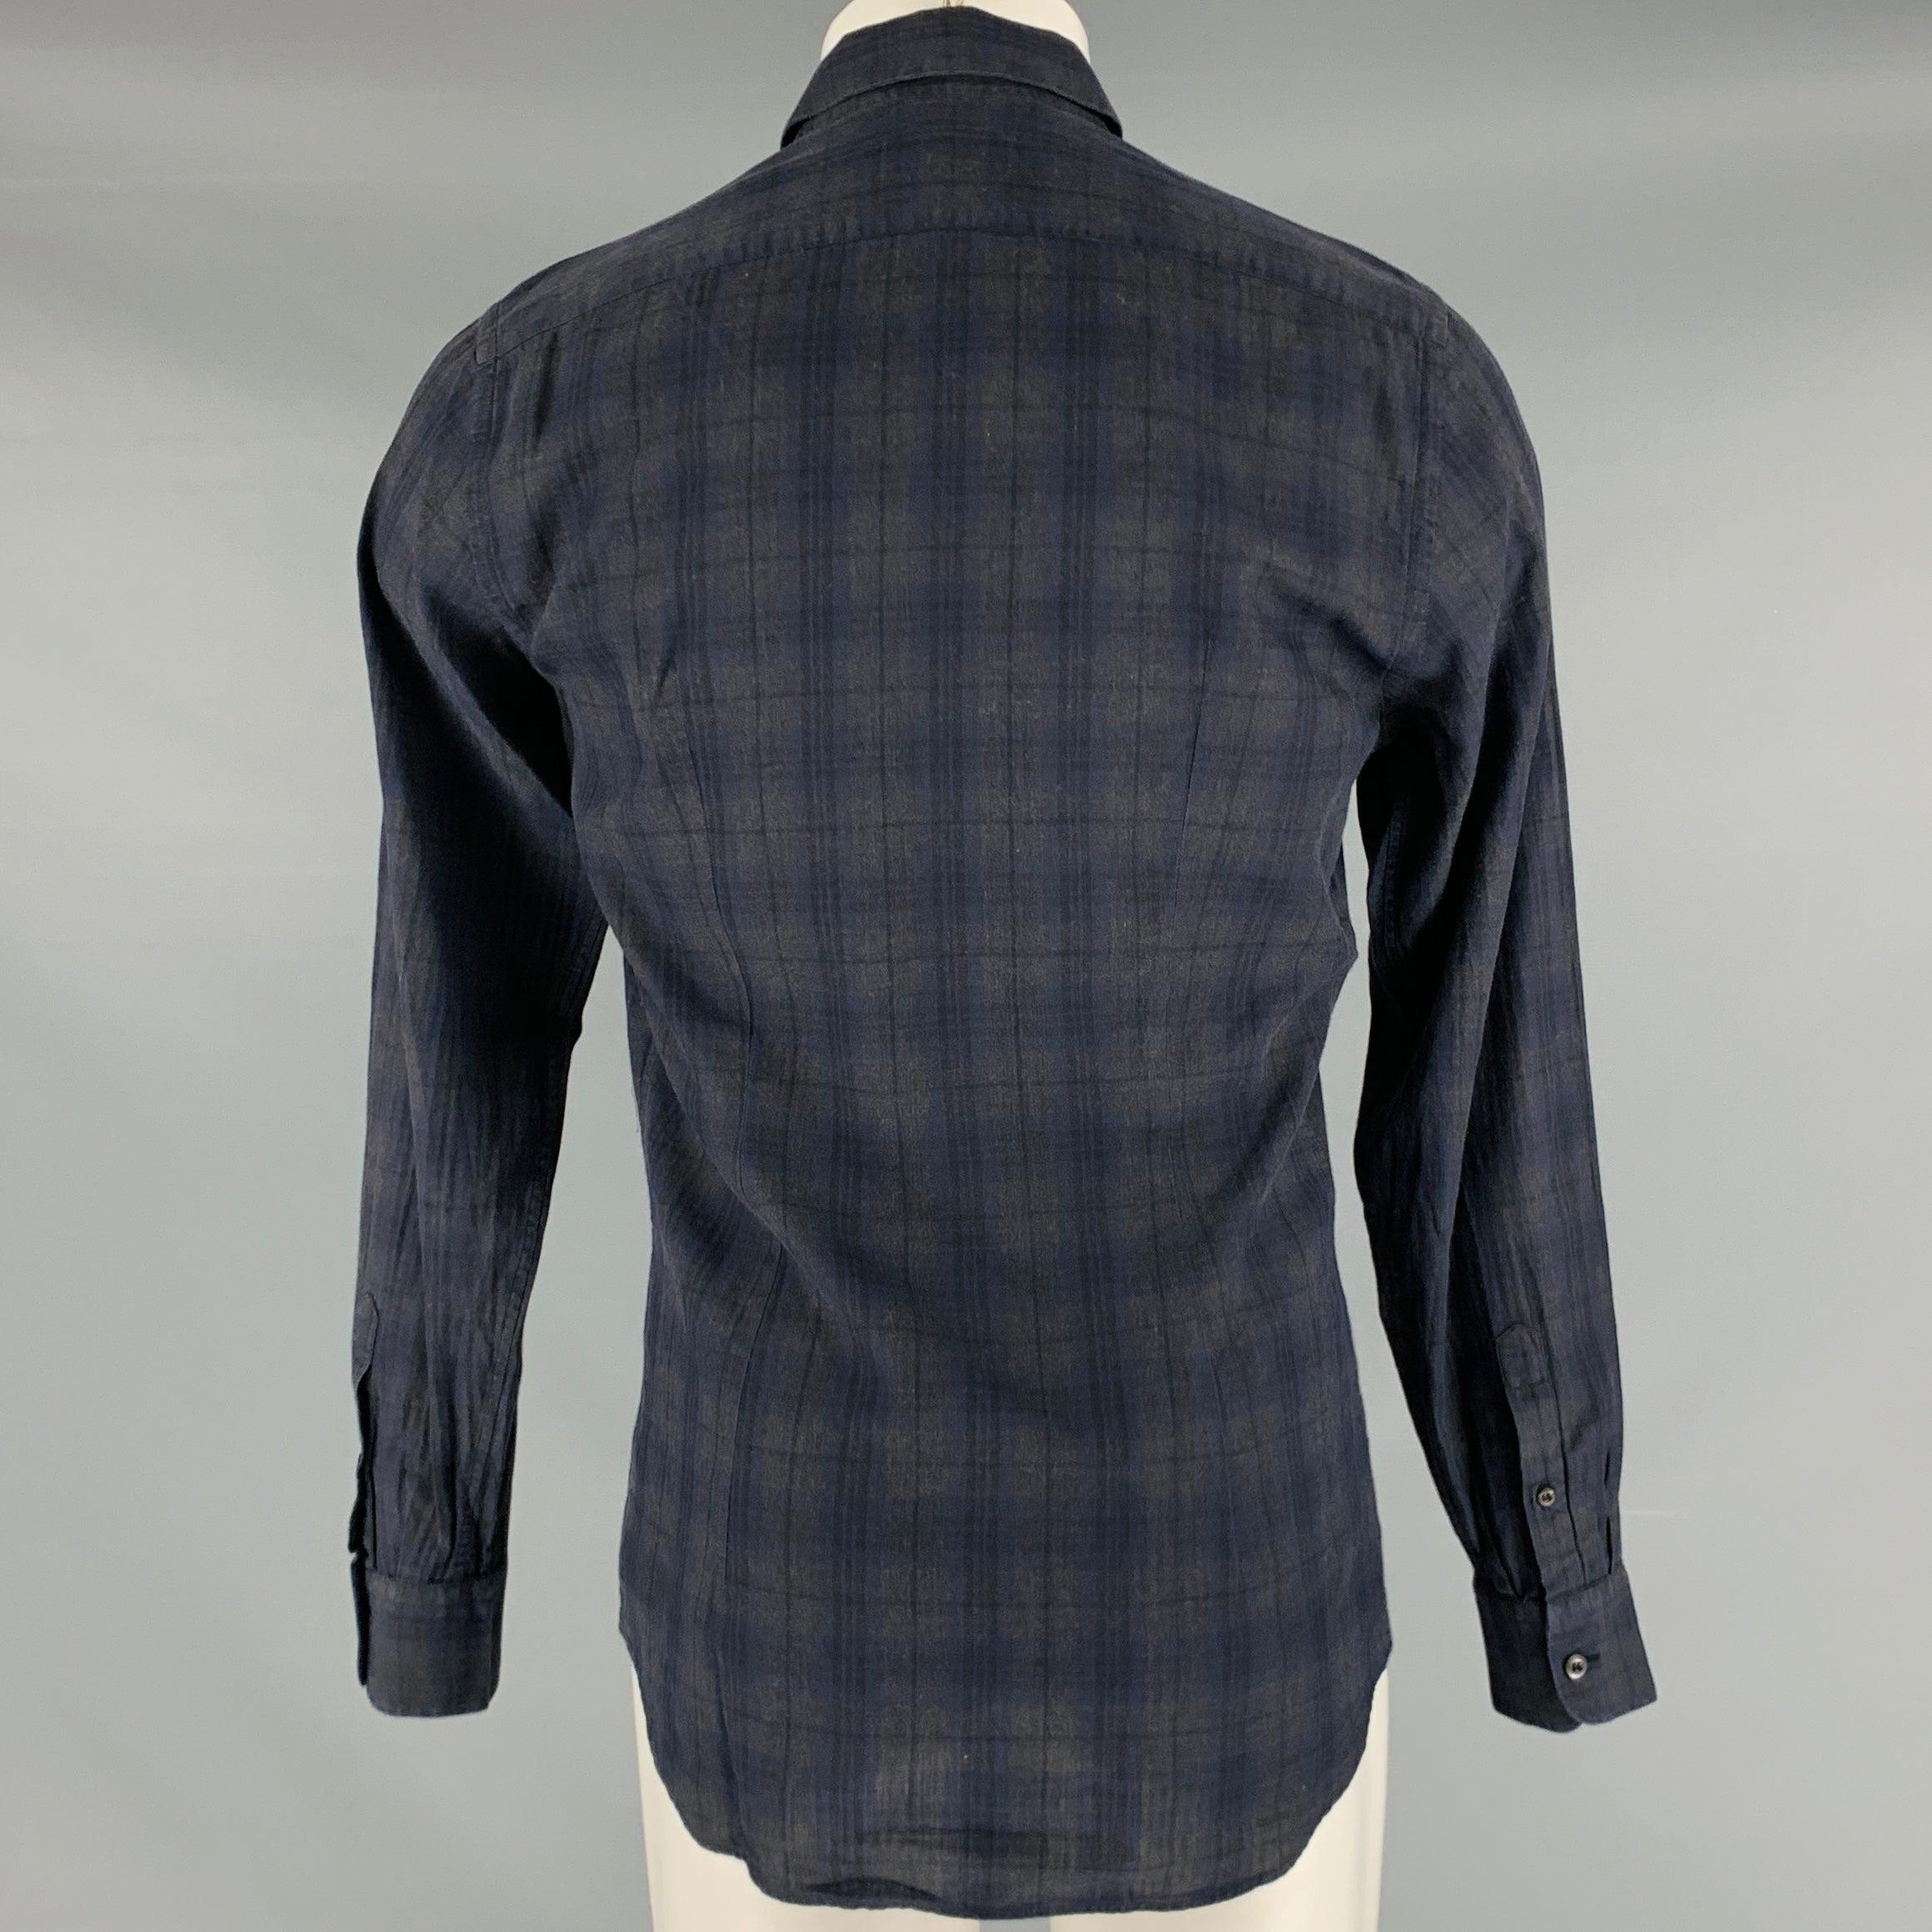 PRADA Size M Charcoal Navy Plaid Cotton Button Up Long Sleeve Shirt In Good Condition For Sale In San Francisco, CA